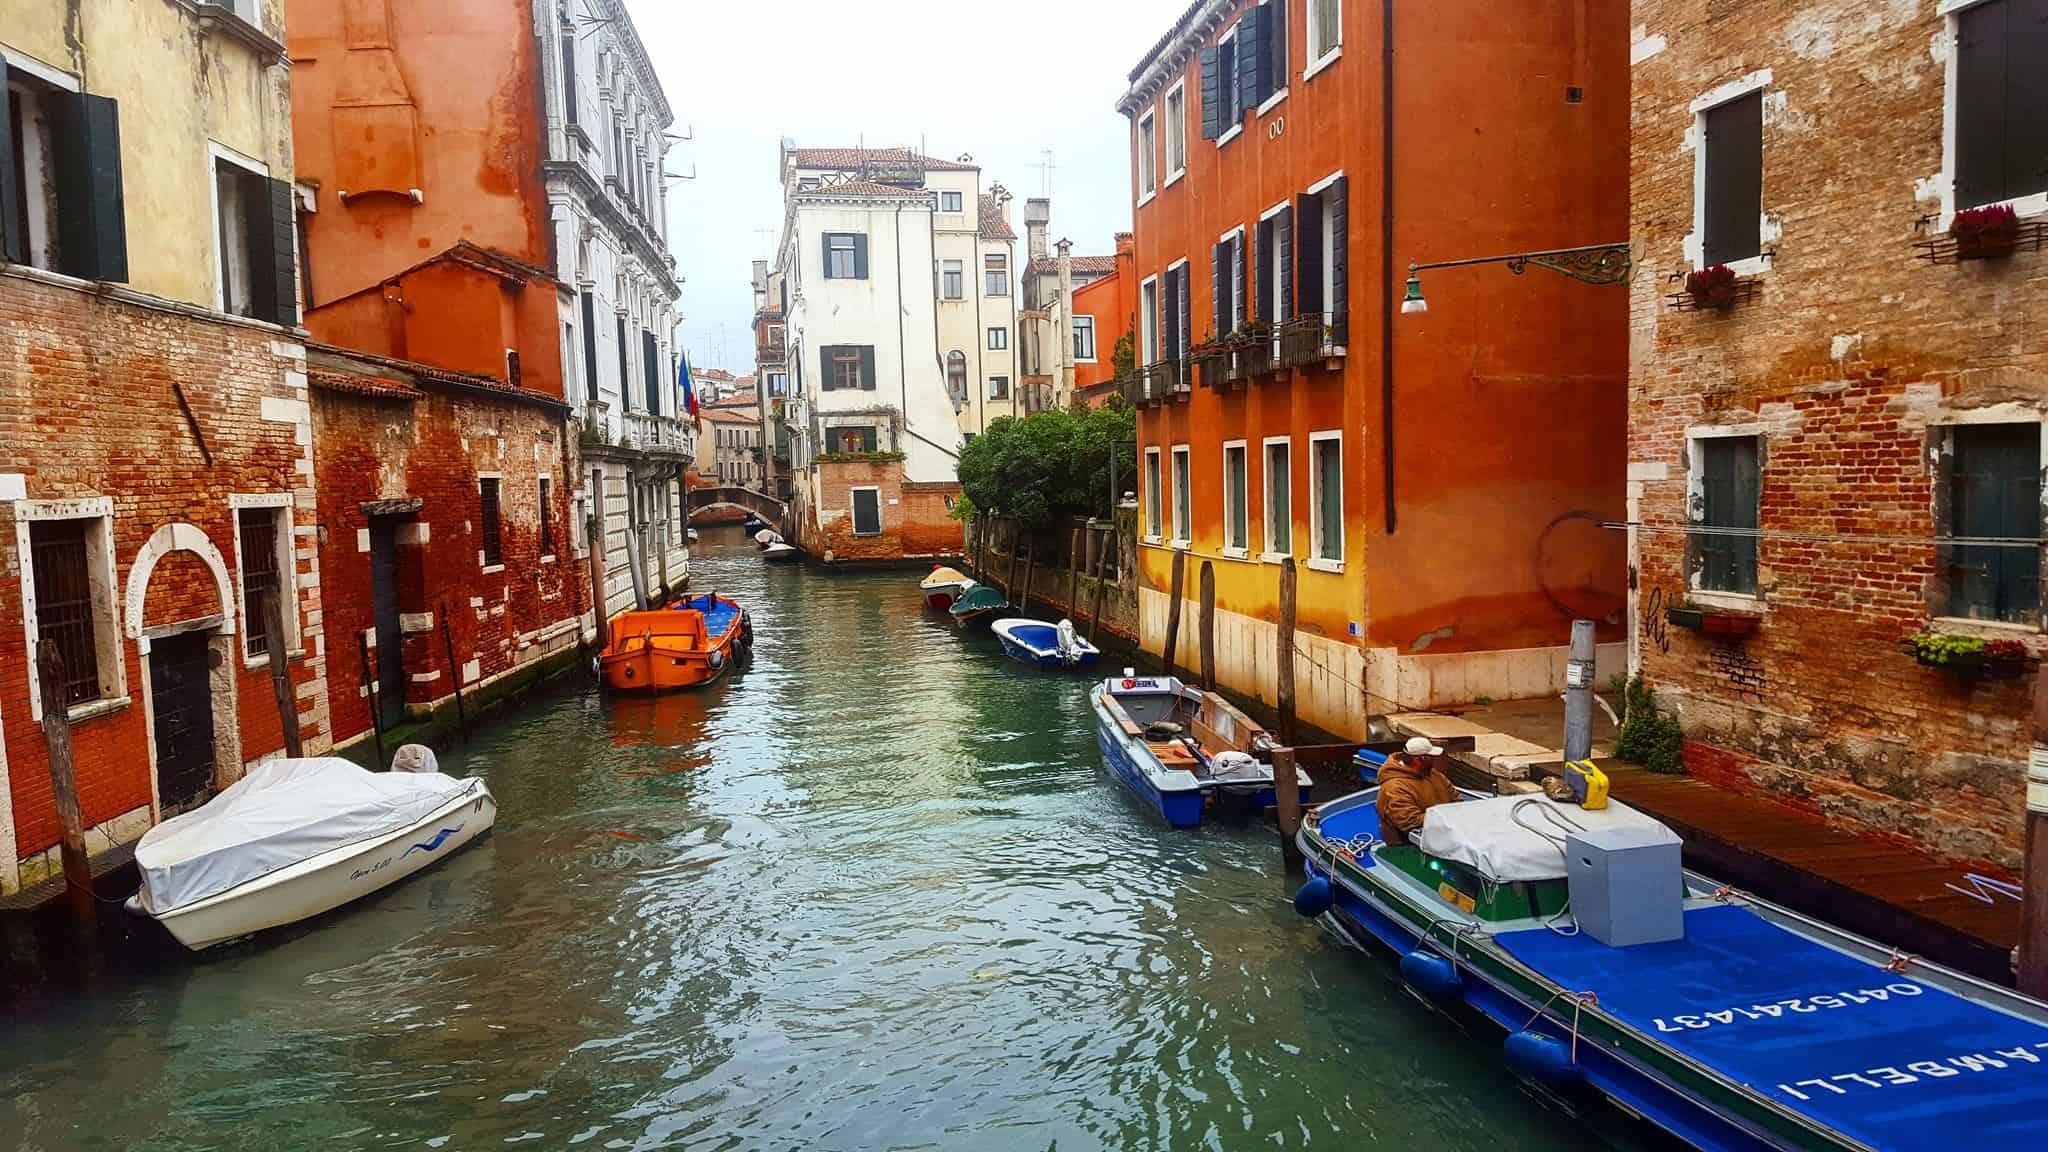 The old canals in Venice